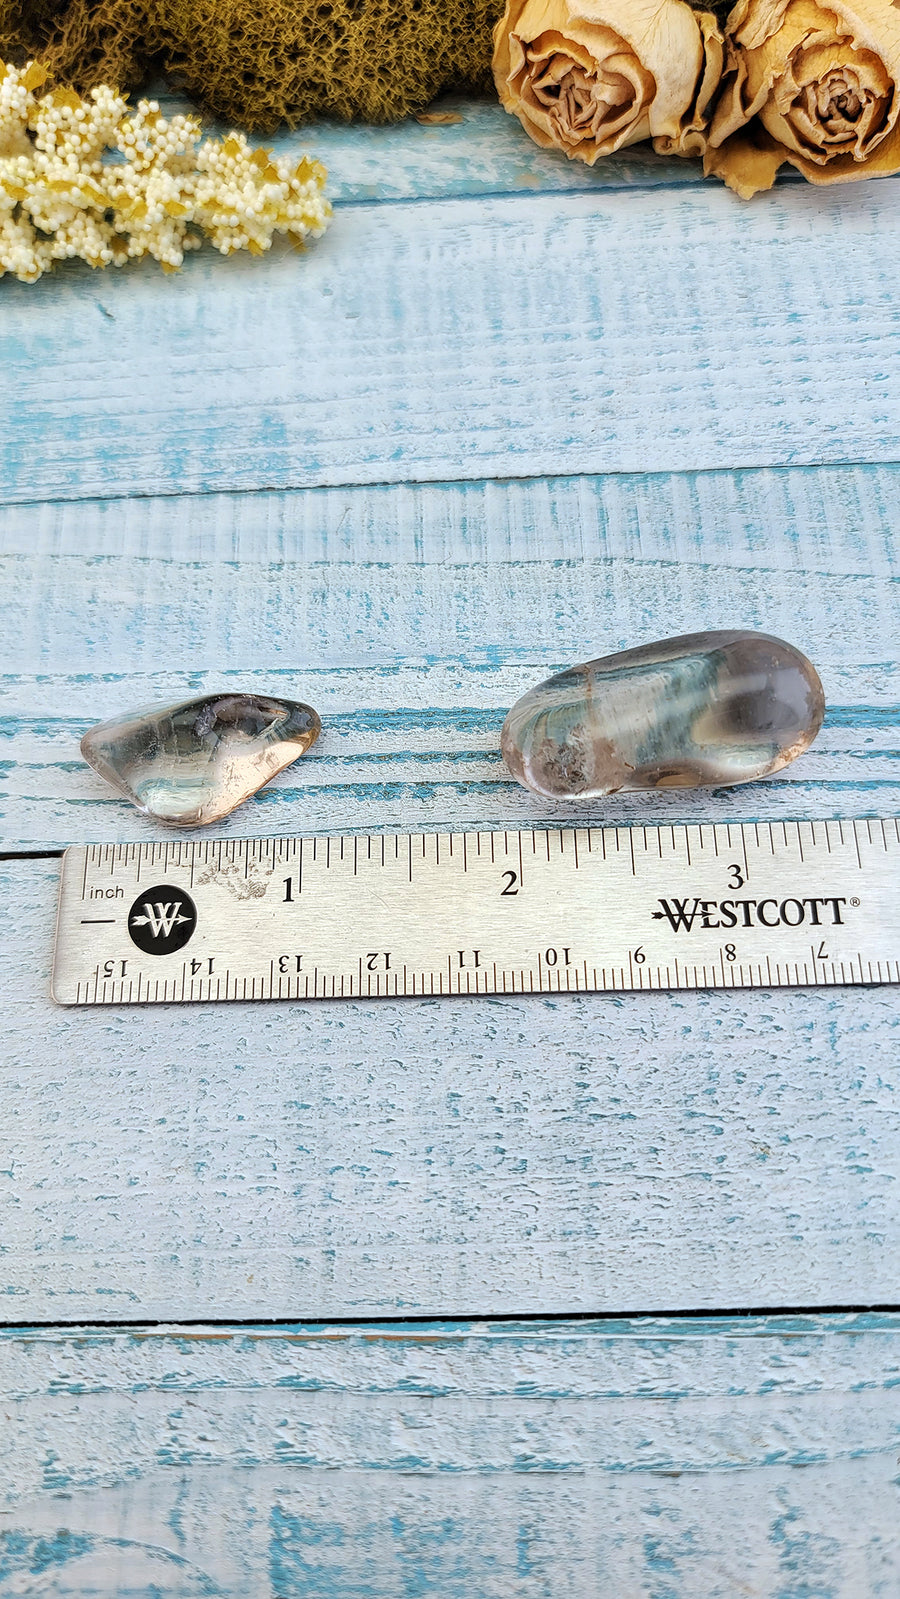 ruler comparing size between two tumbled smoky quartz stones